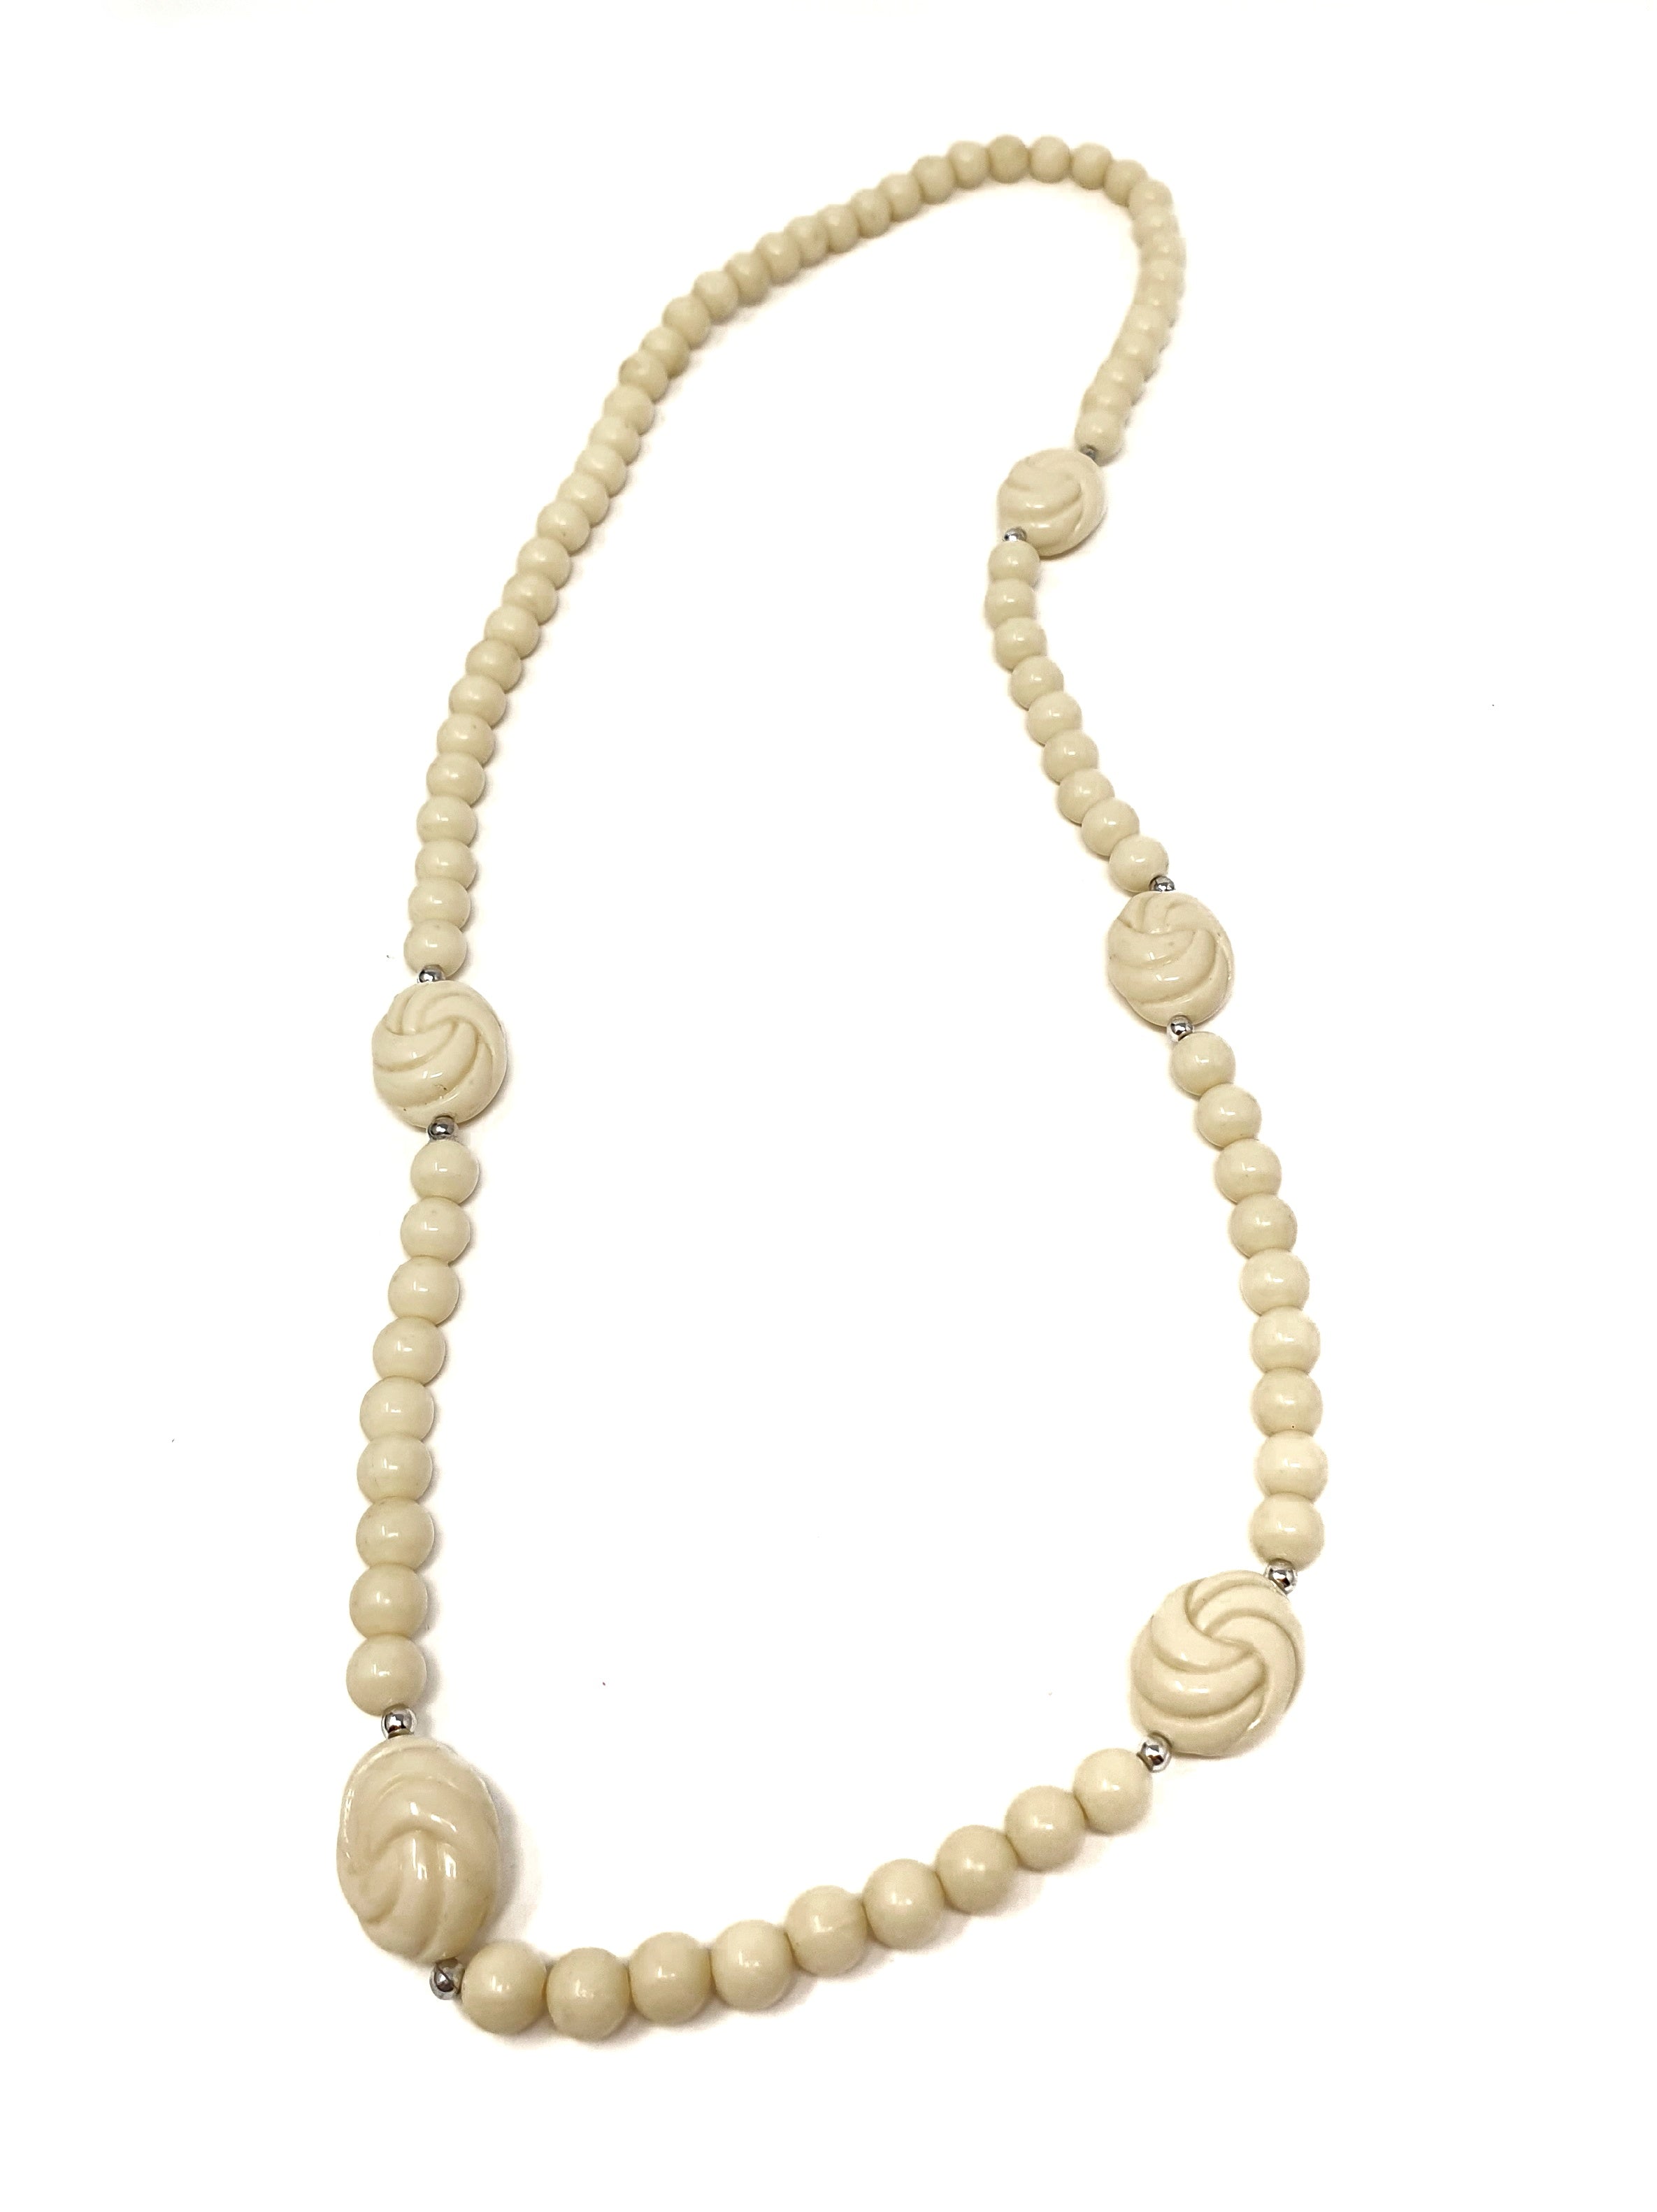 Avon "Carved Accents" necklace 